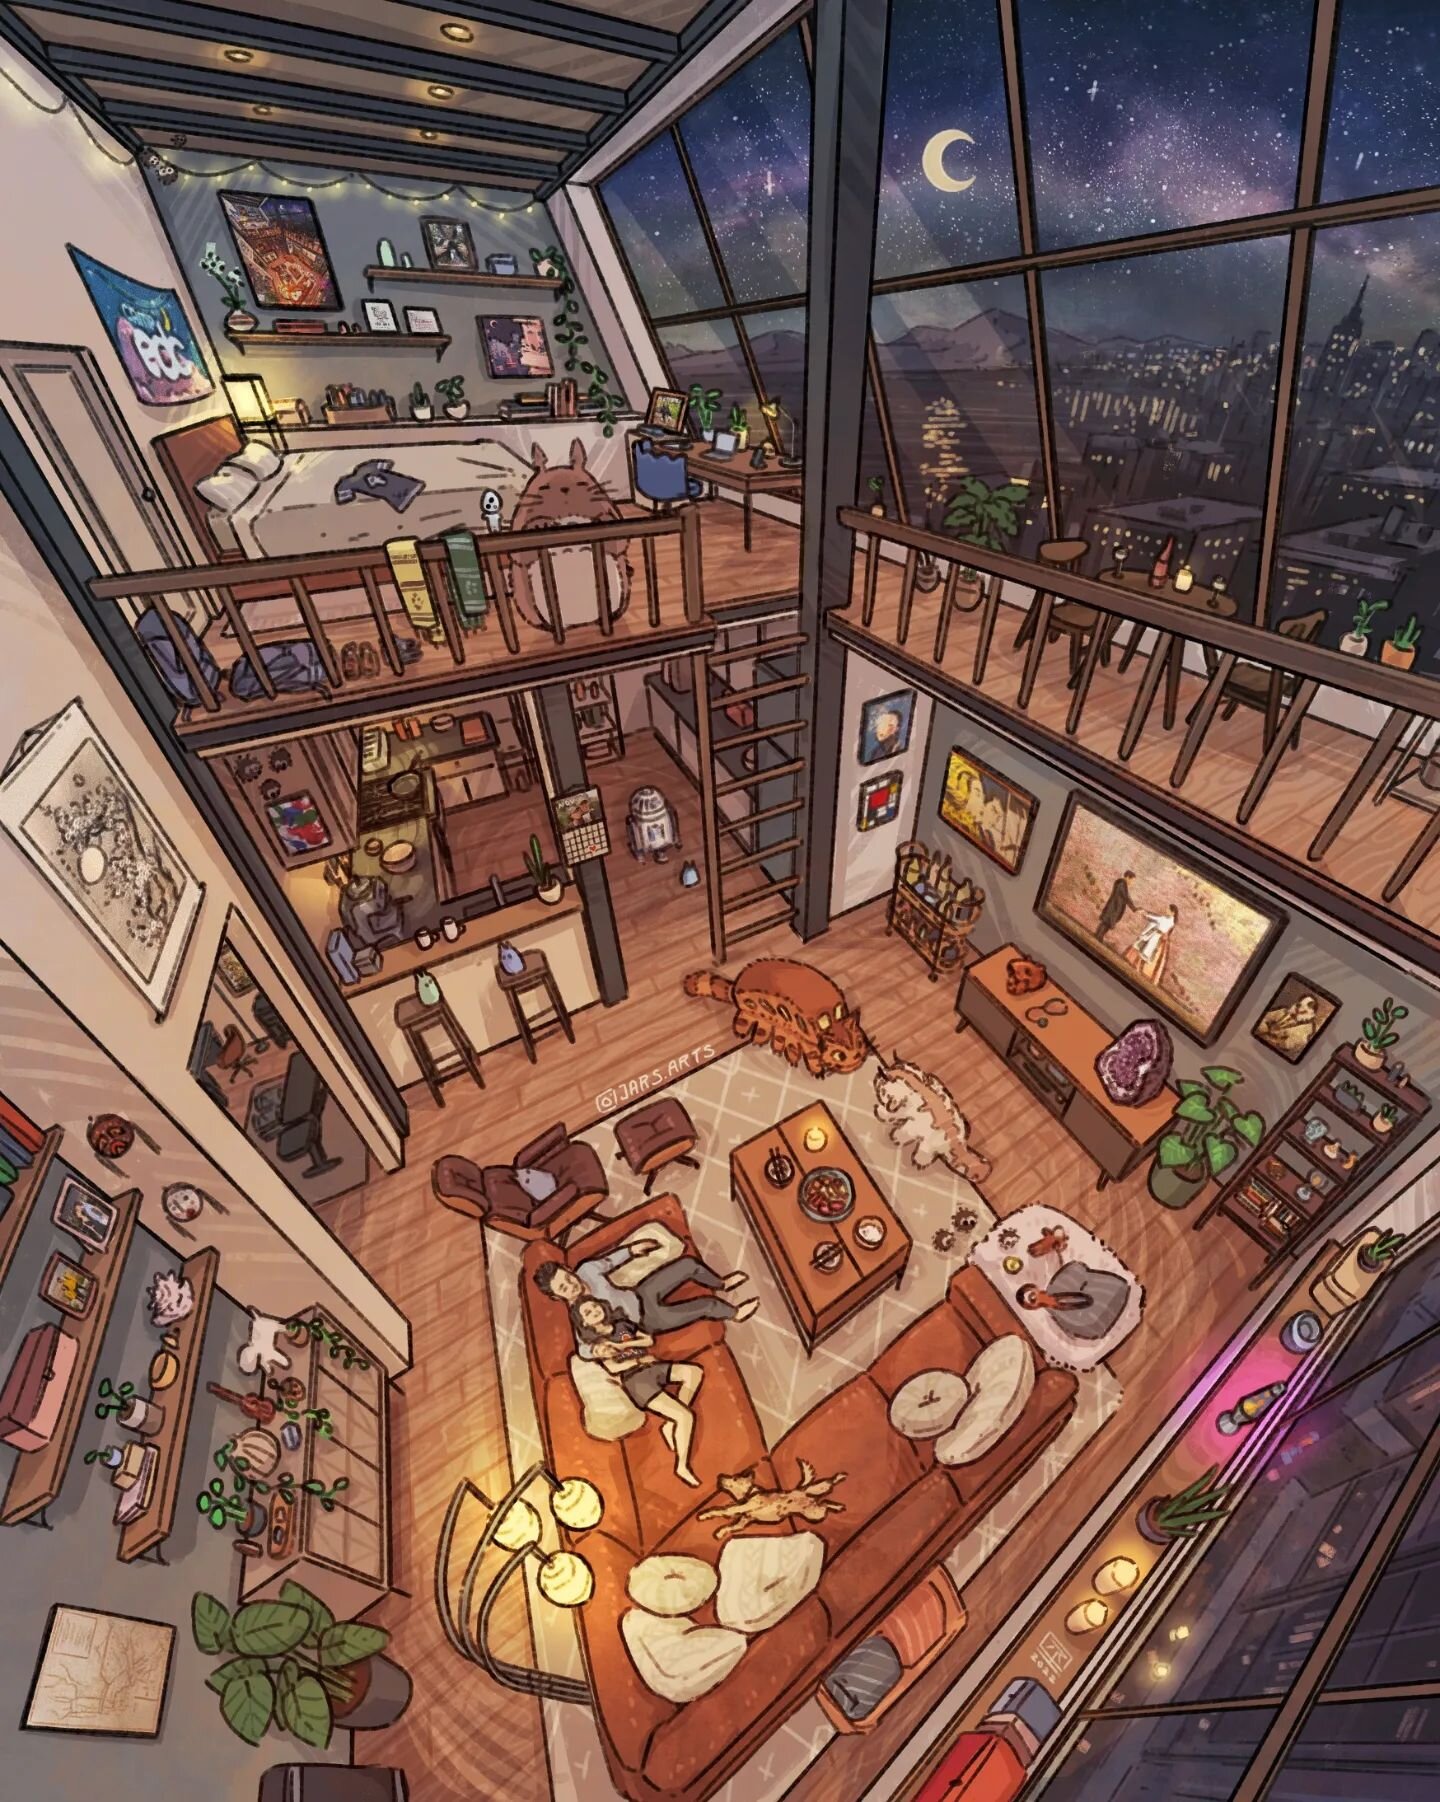 Moonlight Loft, 2022 ~ Love drawing these big window loft commission! This one was a combination of reference and imagination, so I kept their living room furniture in tact but went wild with the room architecture and outdoor views 🌜 Thank you all f